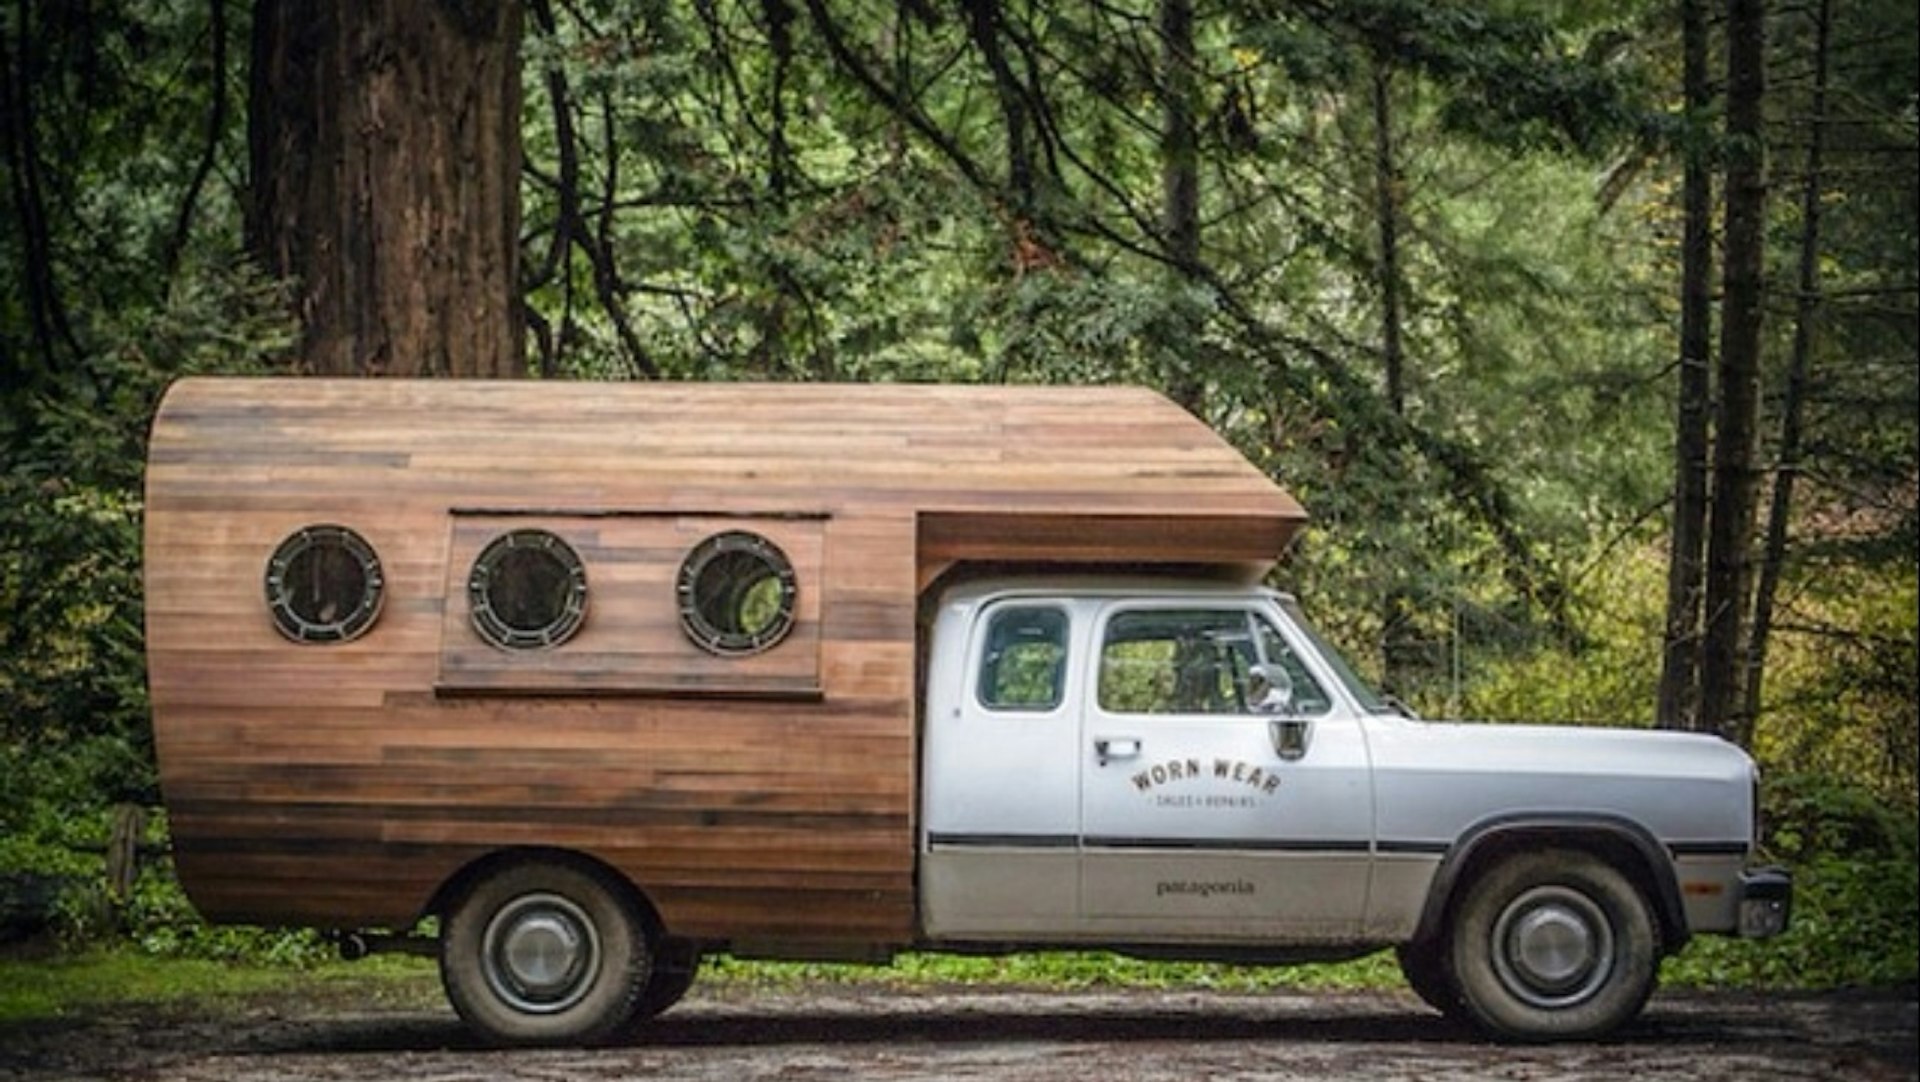 Adventure campers to inspire you to hit the open road